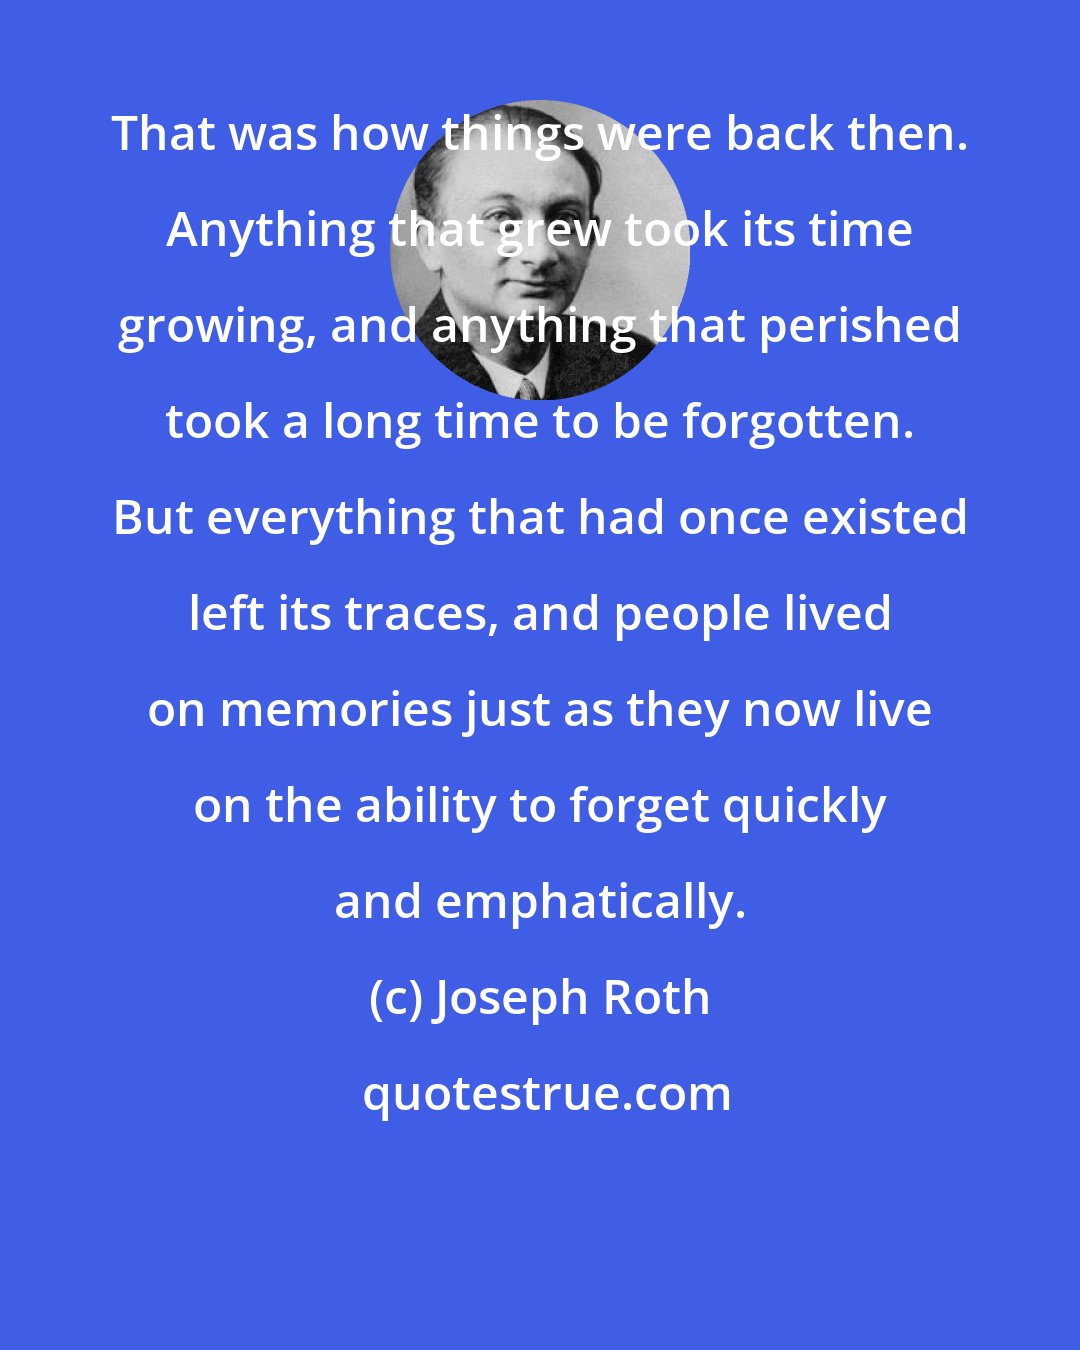 Joseph Roth: That was how things were back then. Anything that grew took its time growing, and anything that perished took a long time to be forgotten. But everything that had once existed left its traces, and people lived on memories just as they now live on the ability to forget quickly and emphatically.